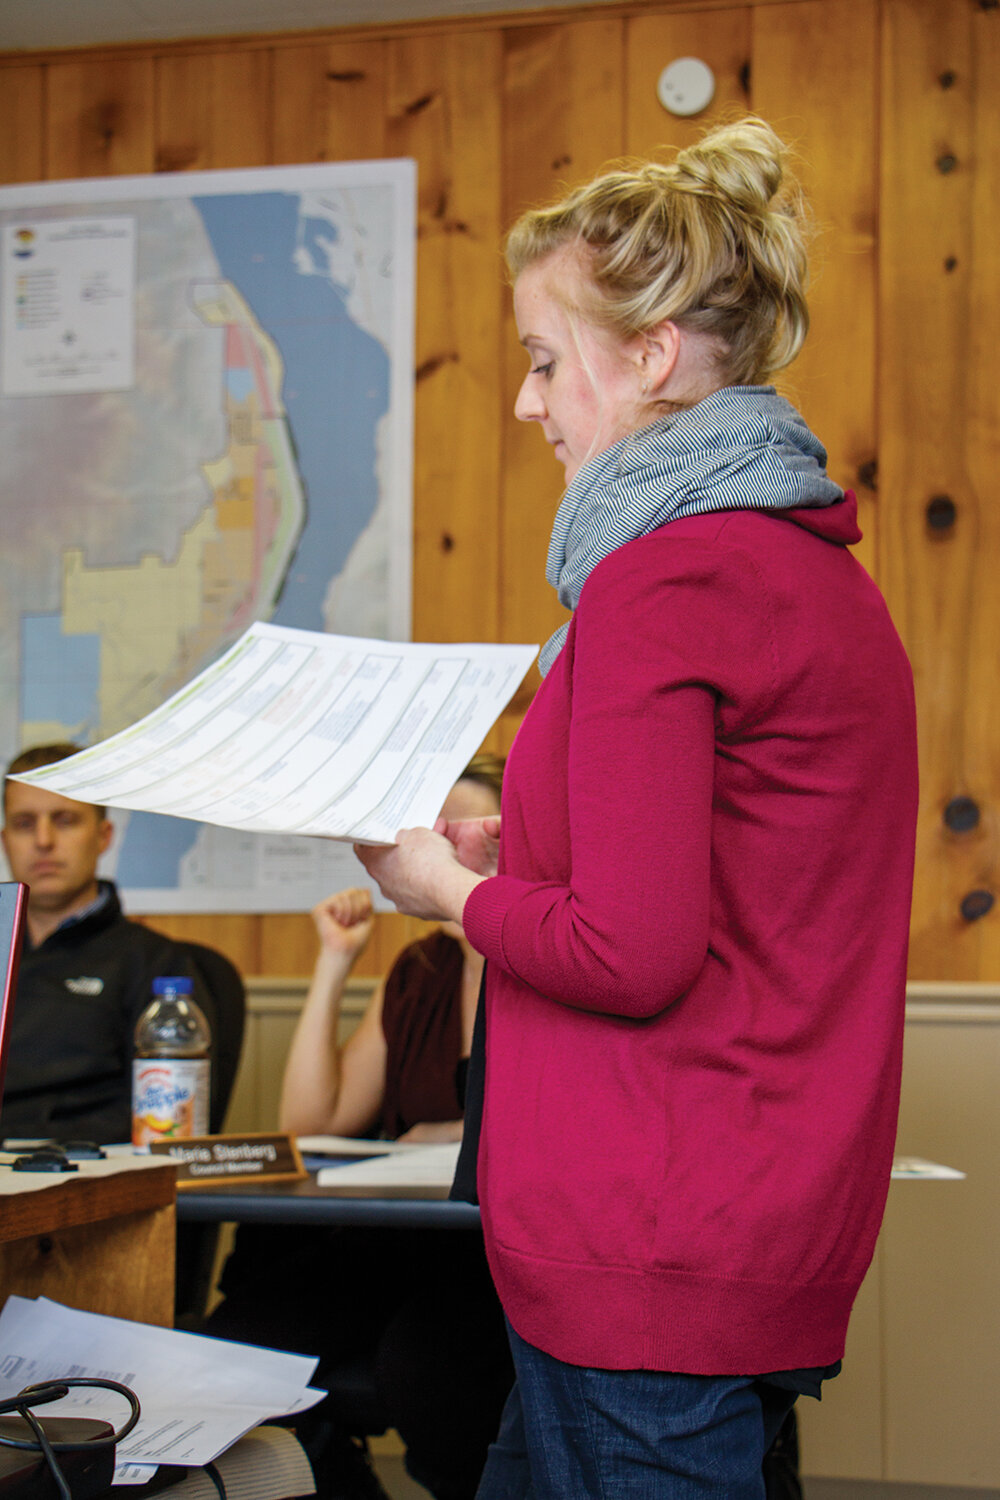 Kara Raftery, of Pacific Engineering, explains grant and action options for upcoming projects to councilmembers, Thursday, Jan. 25 at Council Chambers in Entiat.